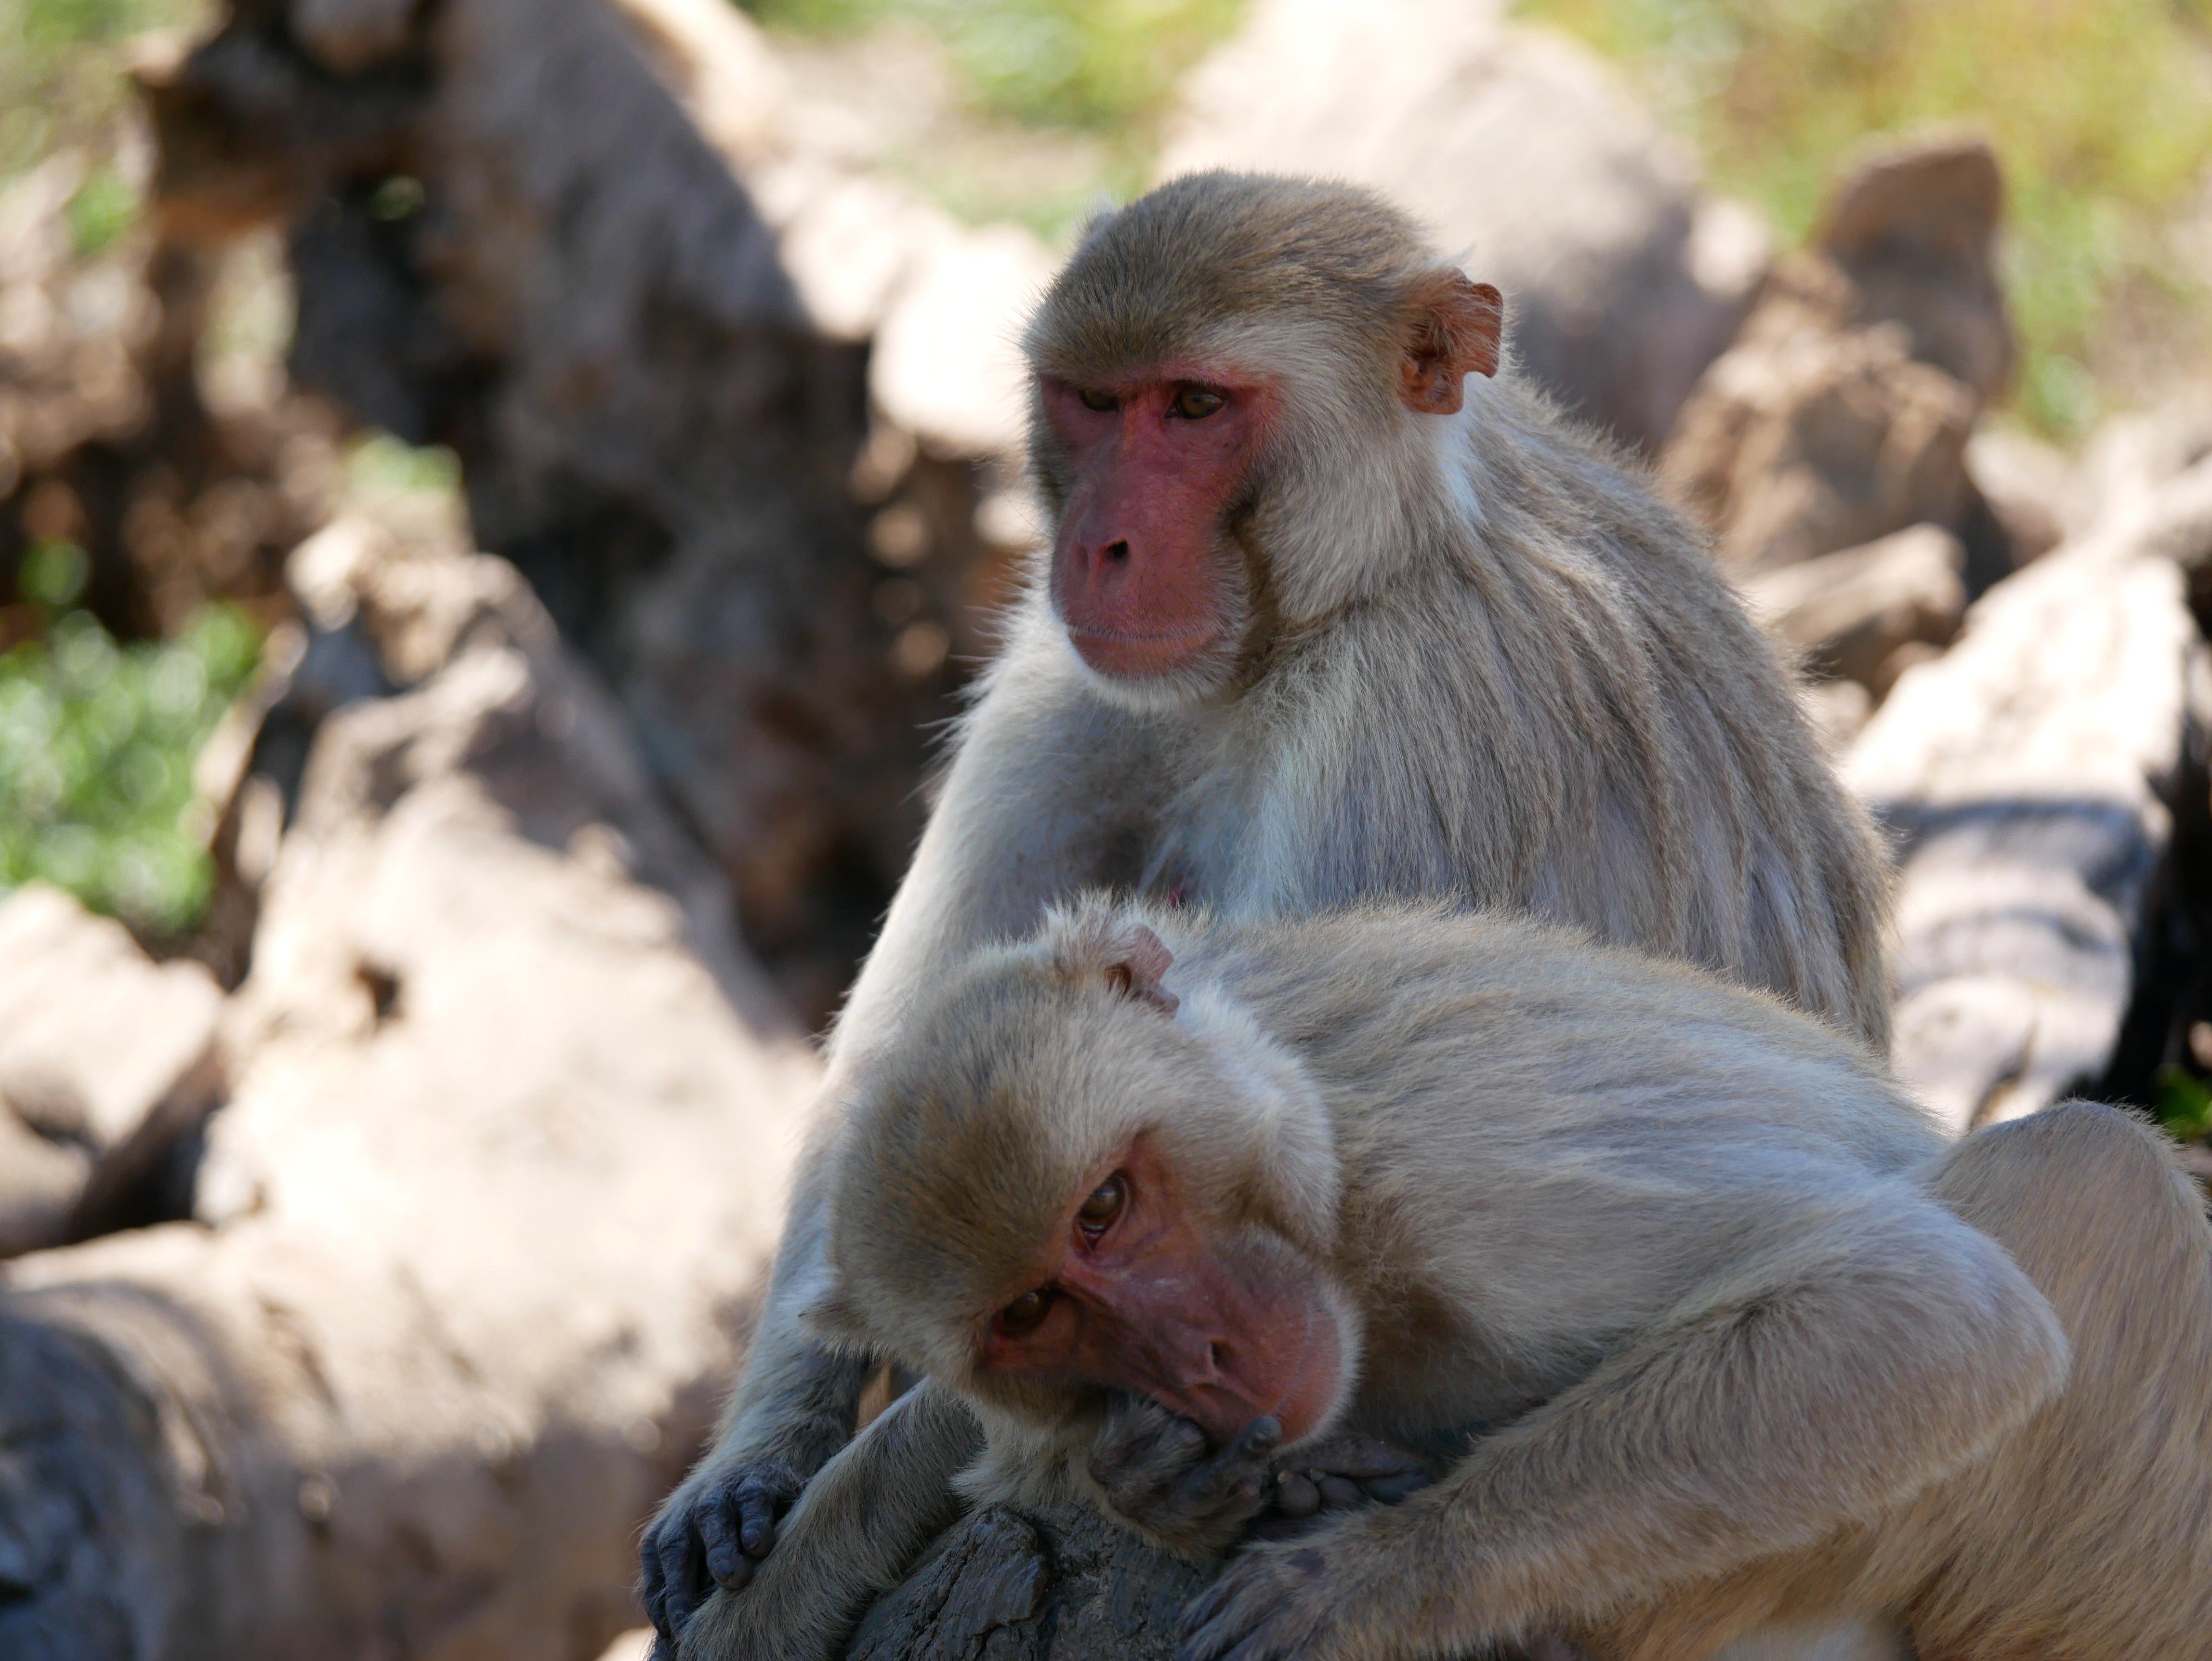 Controversial experiment: Scientists implant bizarre brain chip in monkeys to suppress risk-taking